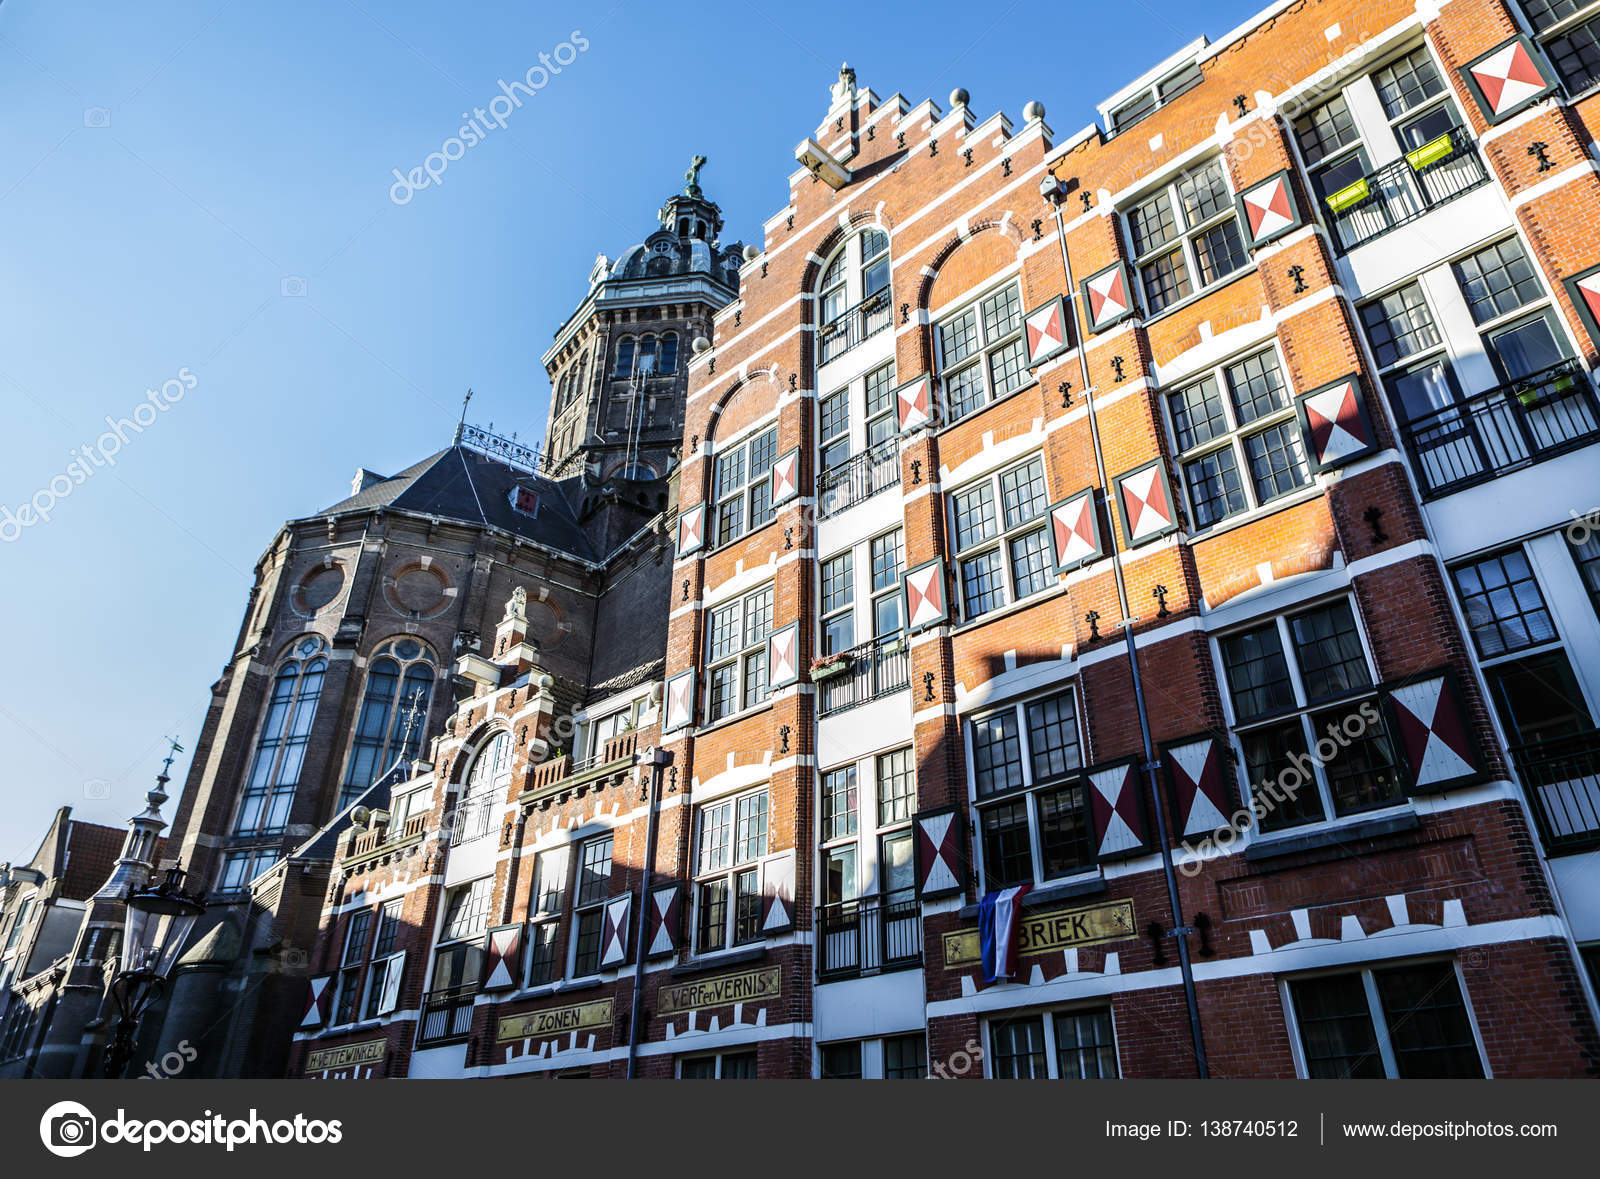 AMSTERDAM, NETHERLANDS - DECEMBER 17, 2017: Famous buildings and place